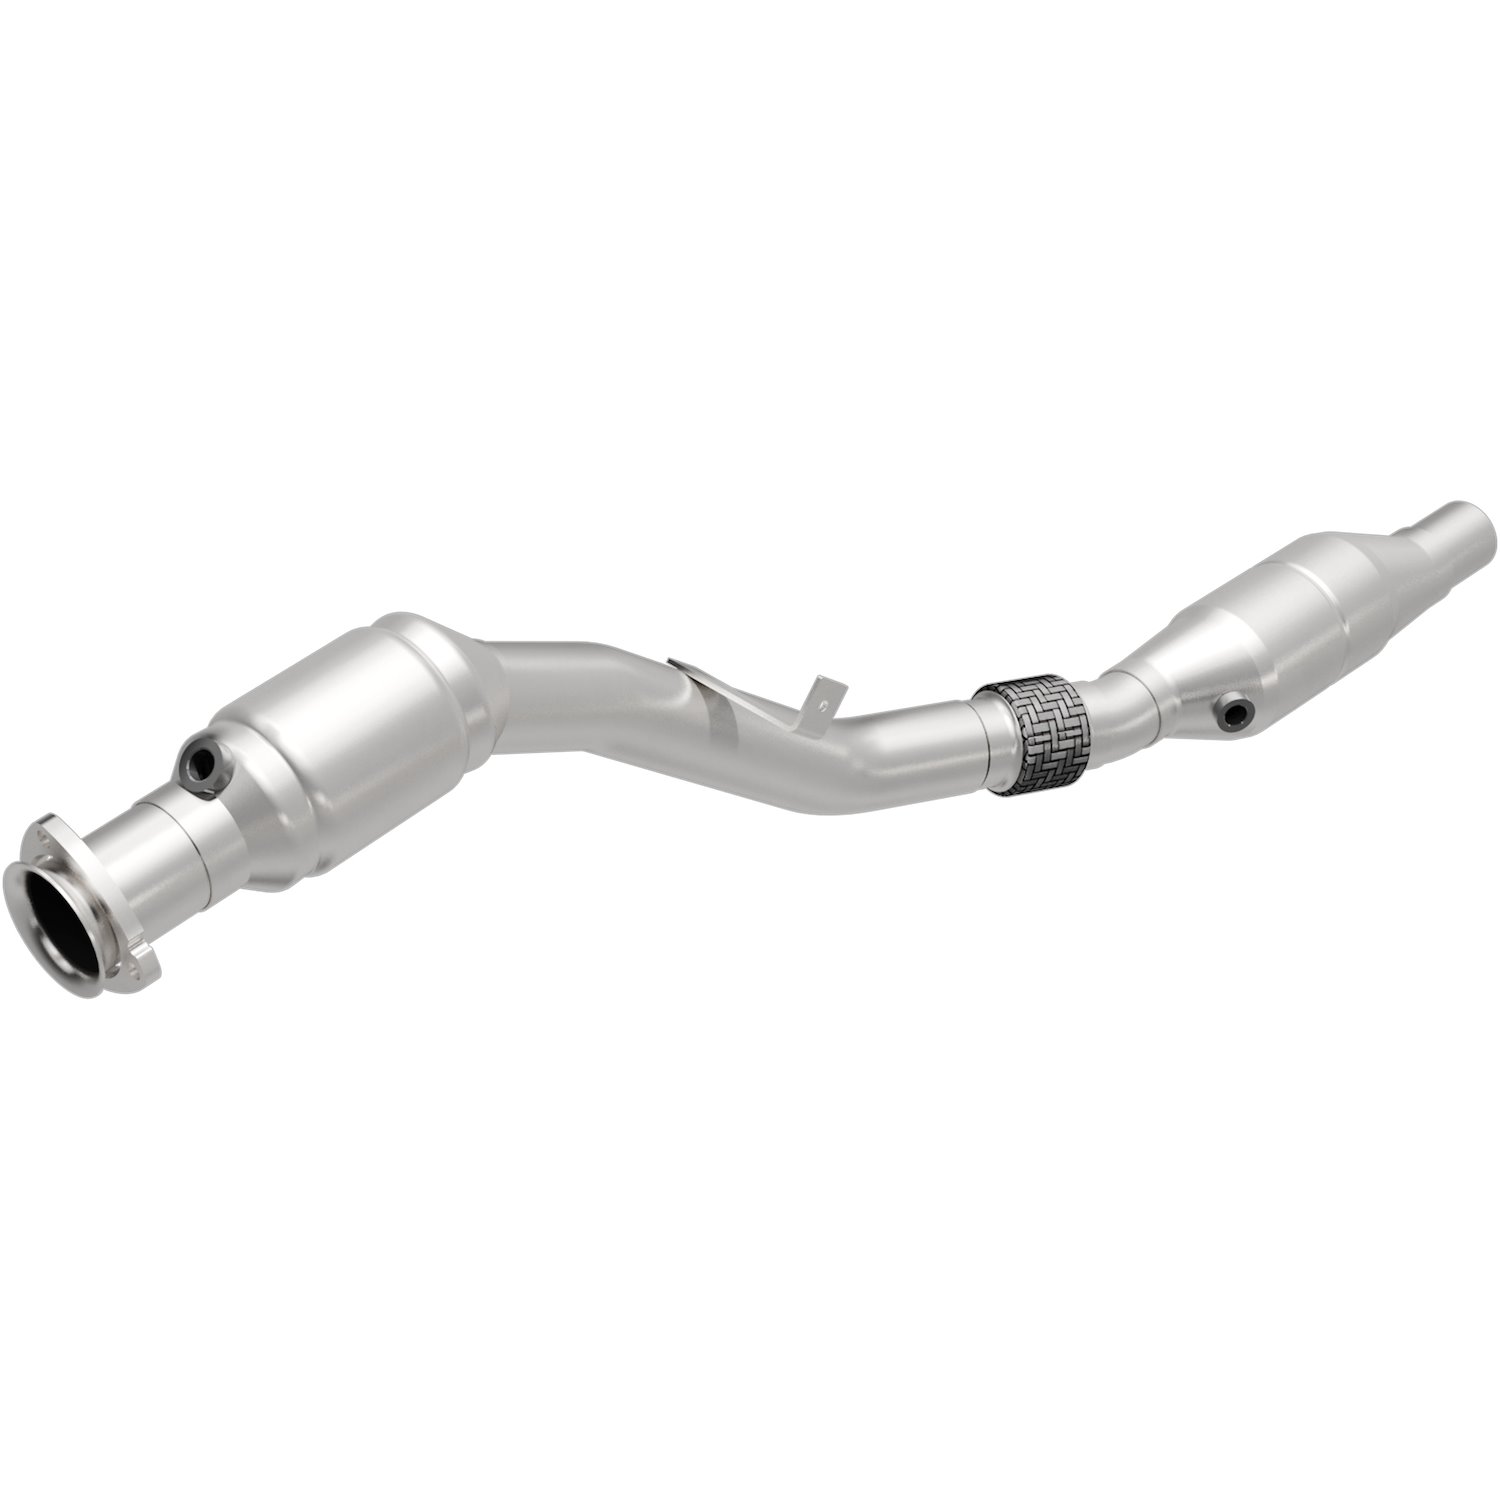 2004-2009 Audi S4 OEM Grade Federal / EPA Compliant Direct-Fit Catalytic Converter